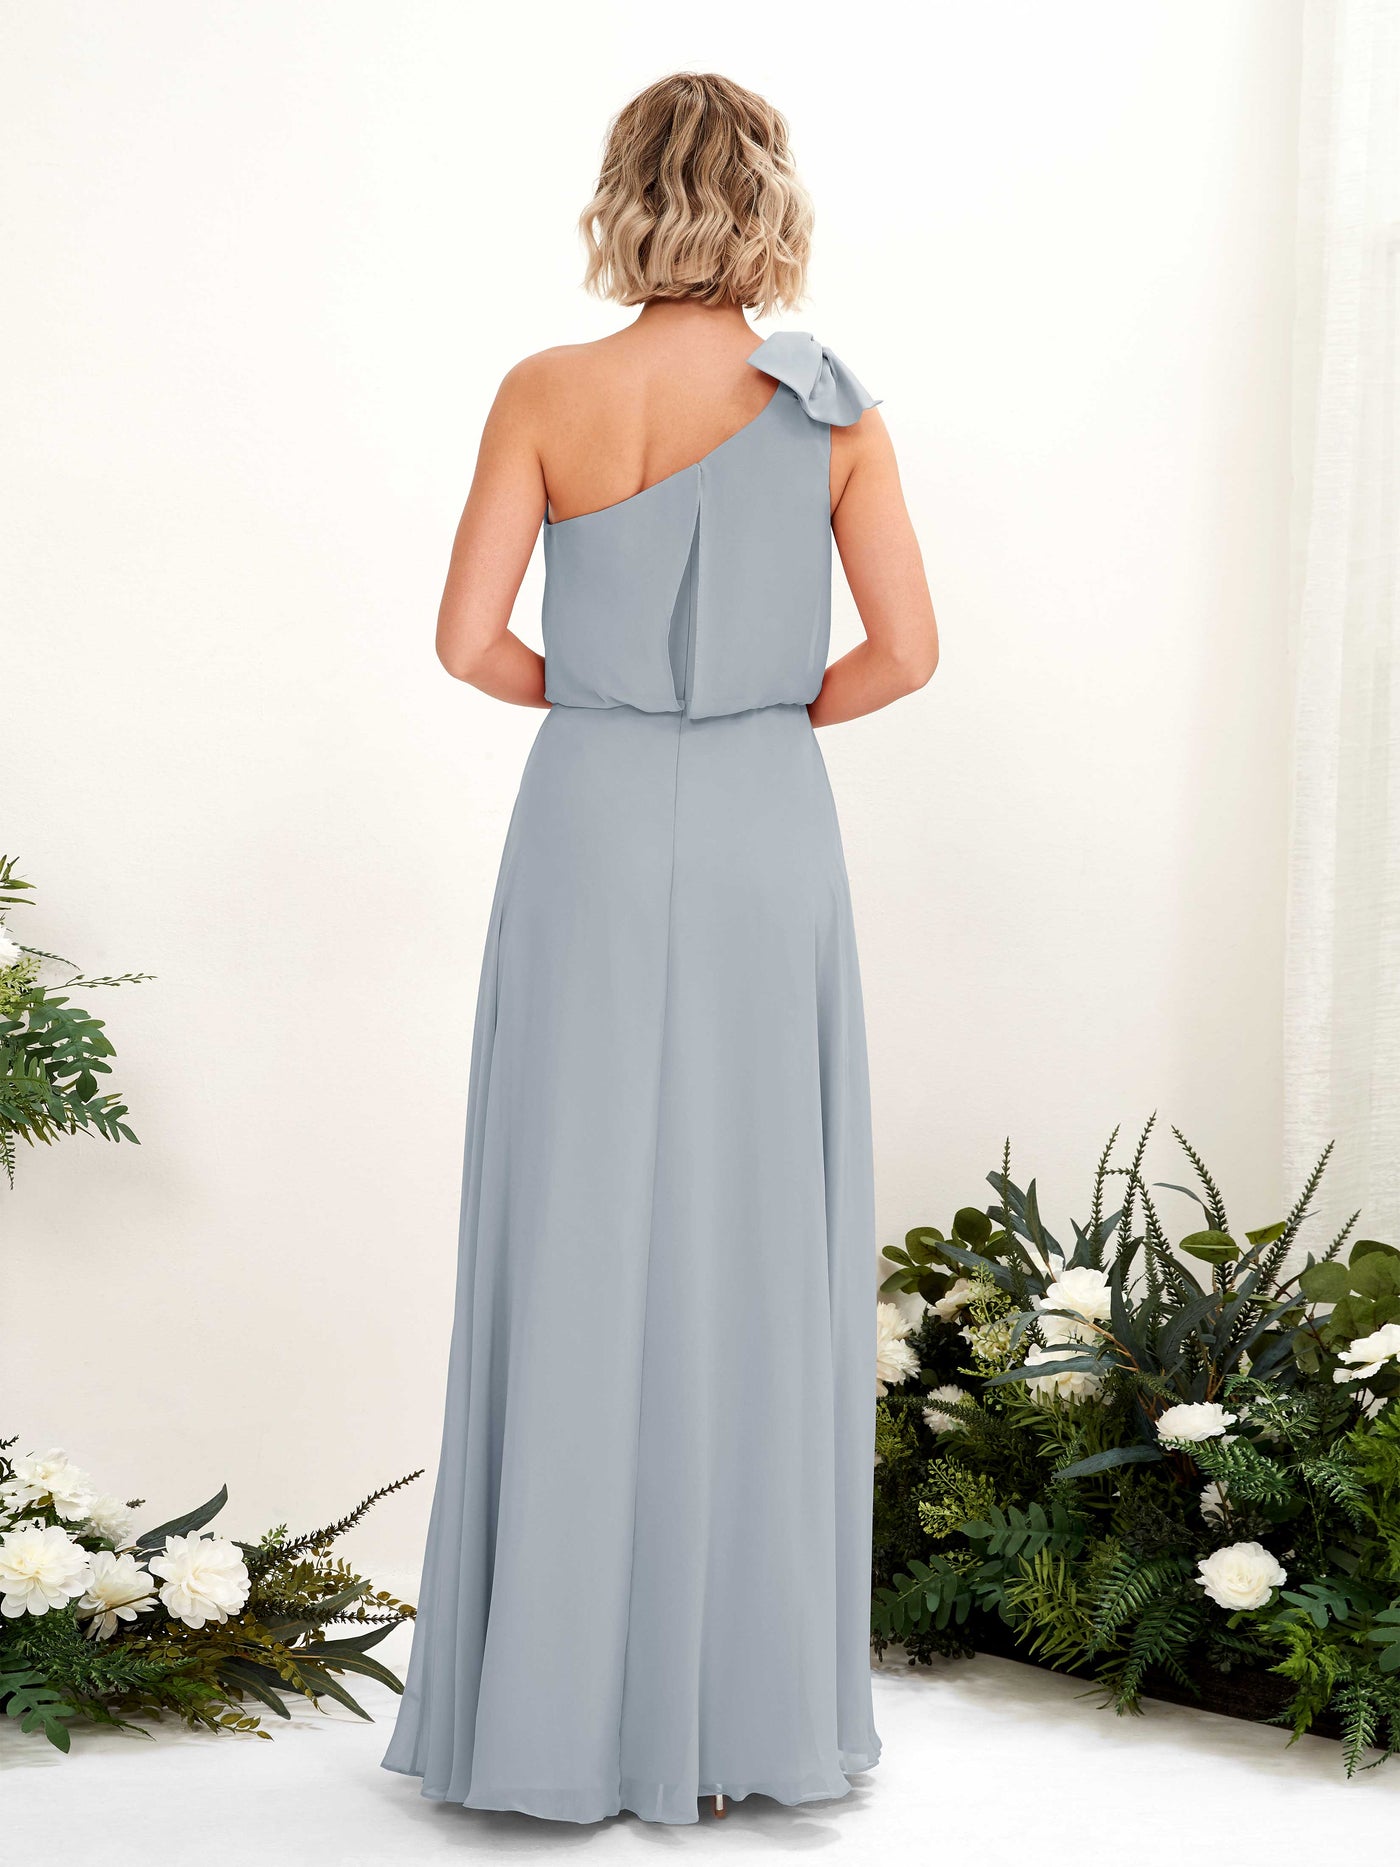 Dusty Blue-Upgrade Bridesmaid Dresses Bridesmaid Dress A-line Chiffon One Shoulder Full Length Sleeveless Wedding Party Dress (81225504)#color_dusty-blue-upgrade